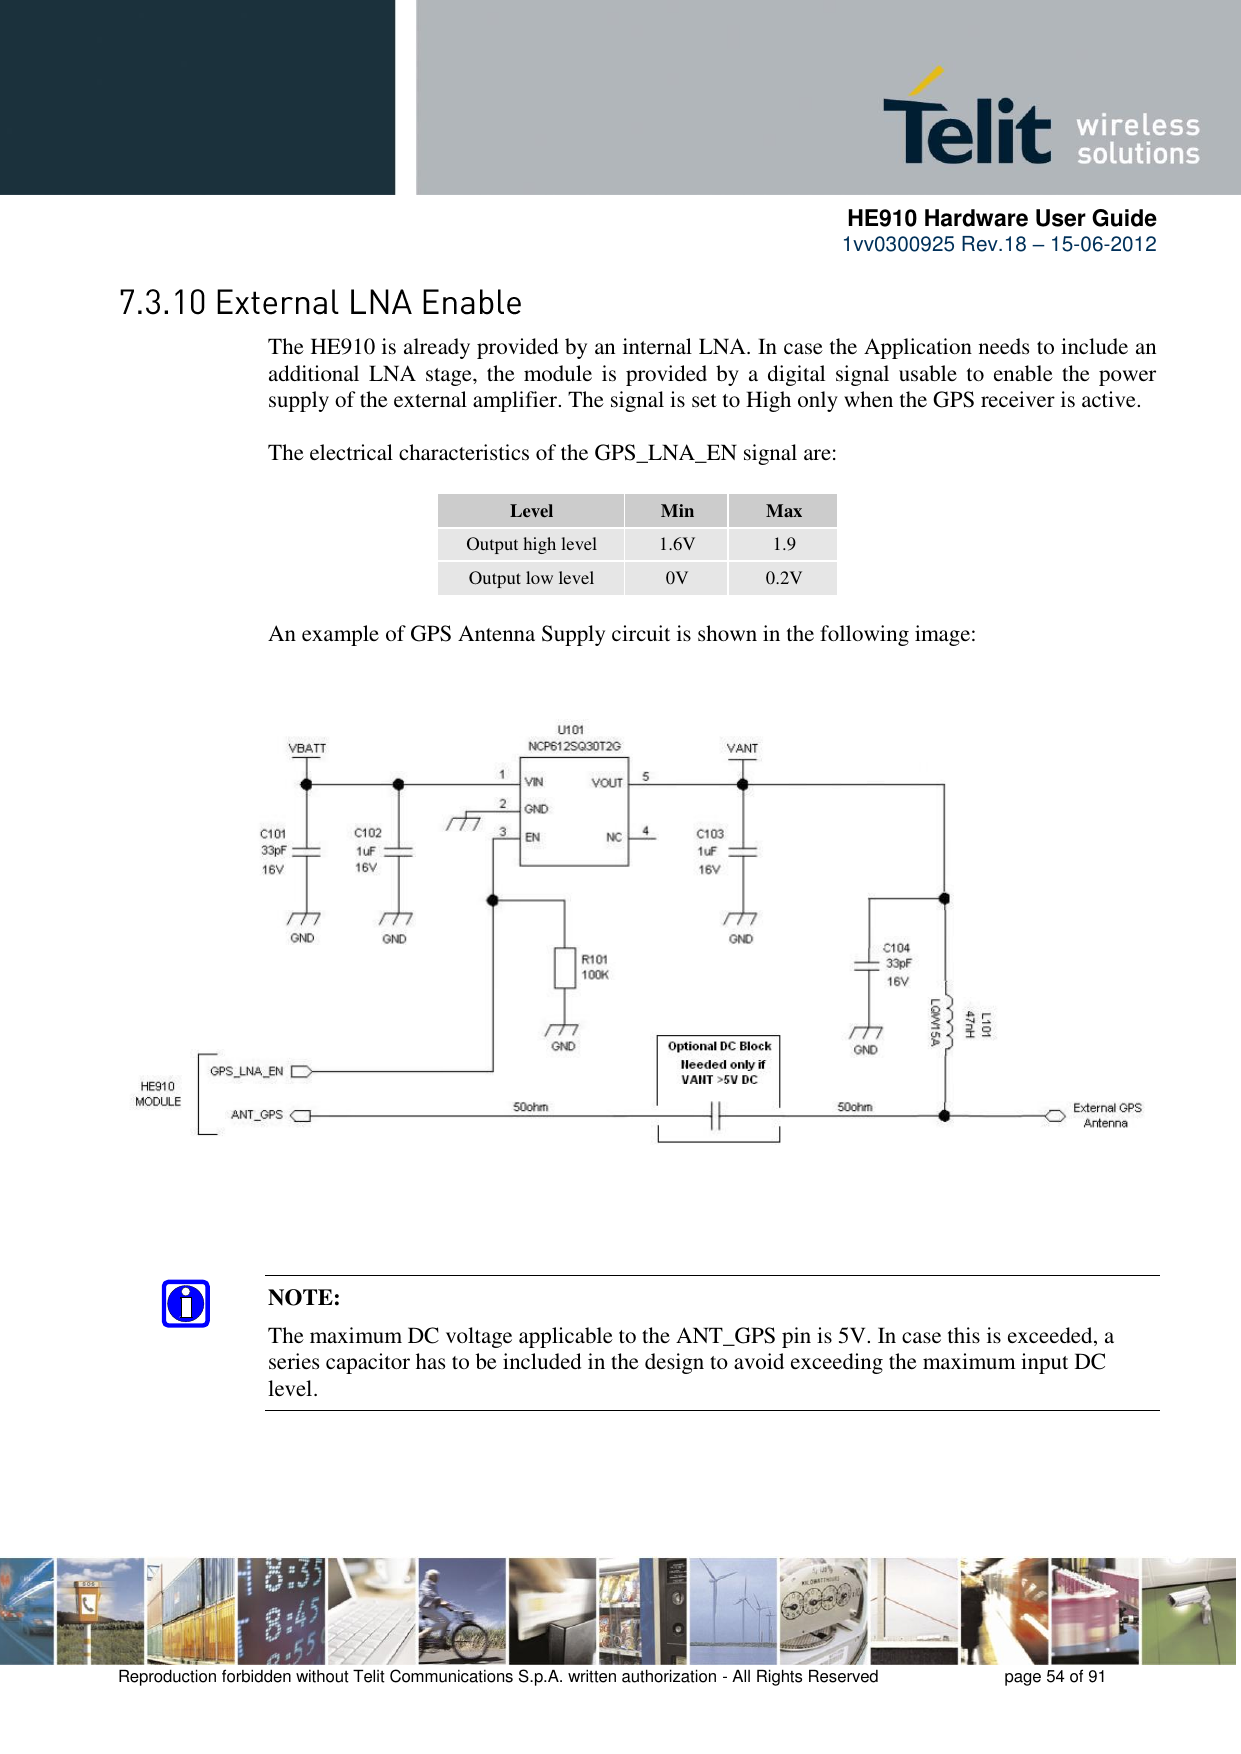      HE910 Hardware User Guide 1vv0300925 Rev.18 – 15-06-2012    Reproduction forbidden without Telit Communications S.p.A. written authorization - All Rights Reserved    page 54 of 91   The HE910 is already provided by an internal LNA. In case the Application needs to include an additional LNA stage, the module is  provided by a digital signal usable to  enable the power supply of the external amplifier. The signal is set to High only when the GPS receiver is active.  The electrical characteristics of the GPS_LNA_EN signal are:  Level Min Max Output high level 1.6V 1.9 Output low level 0V 0.2V  An example of GPS Antenna Supply circuit is shown in the following image:     NOTE: The maximum DC voltage applicable to the ANT_GPS pin is 5V. In case this is exceeded, a series capacitor has to be included in the design to avoid exceeding the maximum input DC level. 